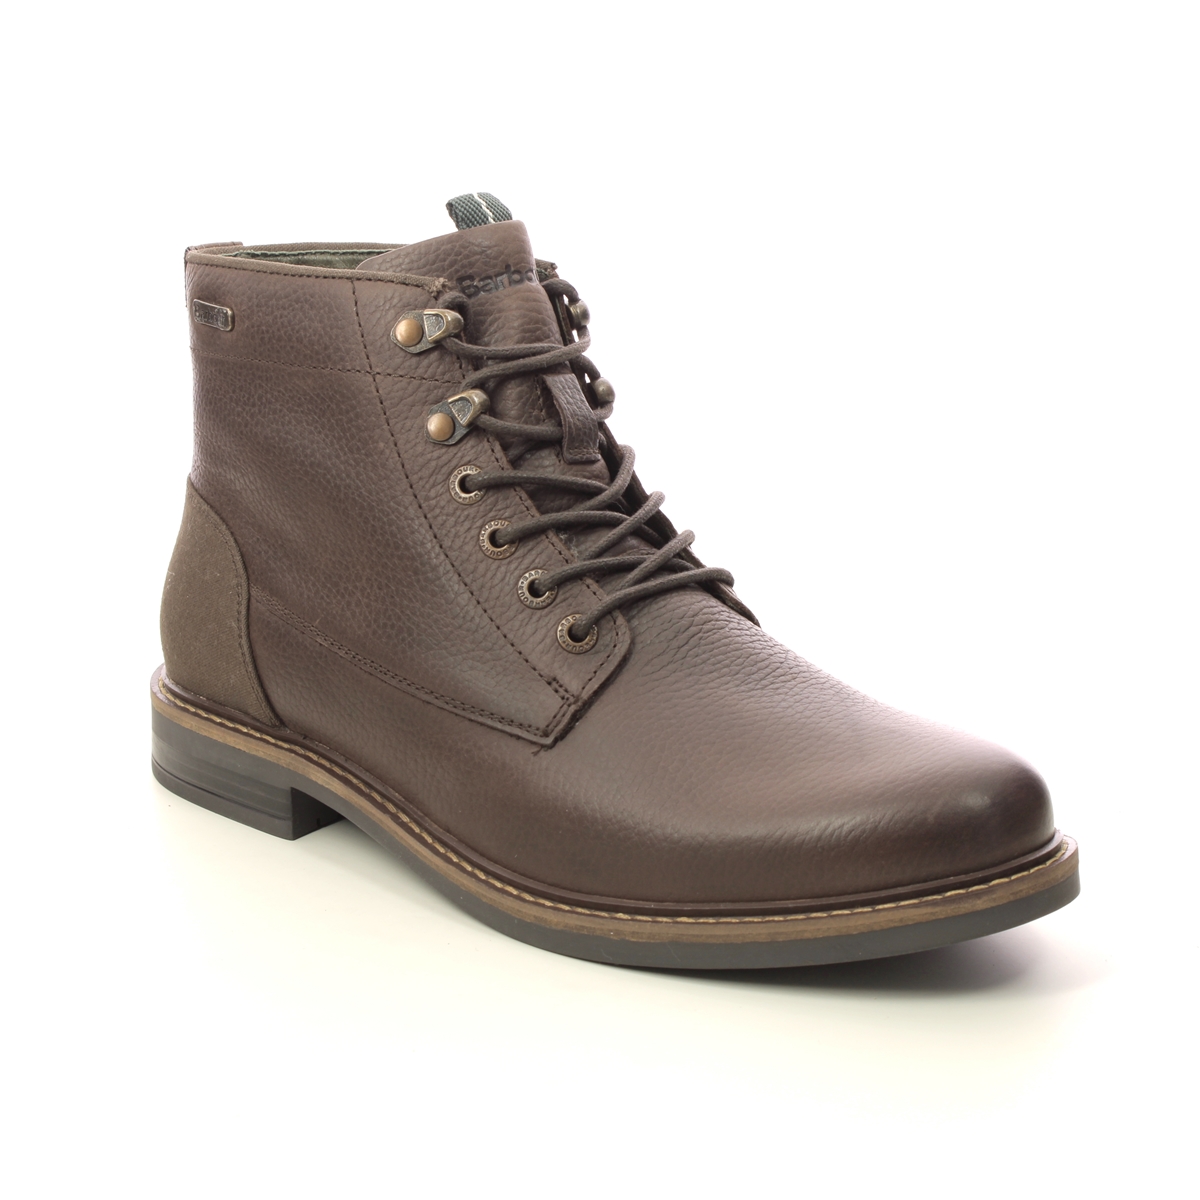 Barbour Deckham Derby Brown Leather Boots Mfo0644-Br77 In Size 10 In Plain Brown Leather